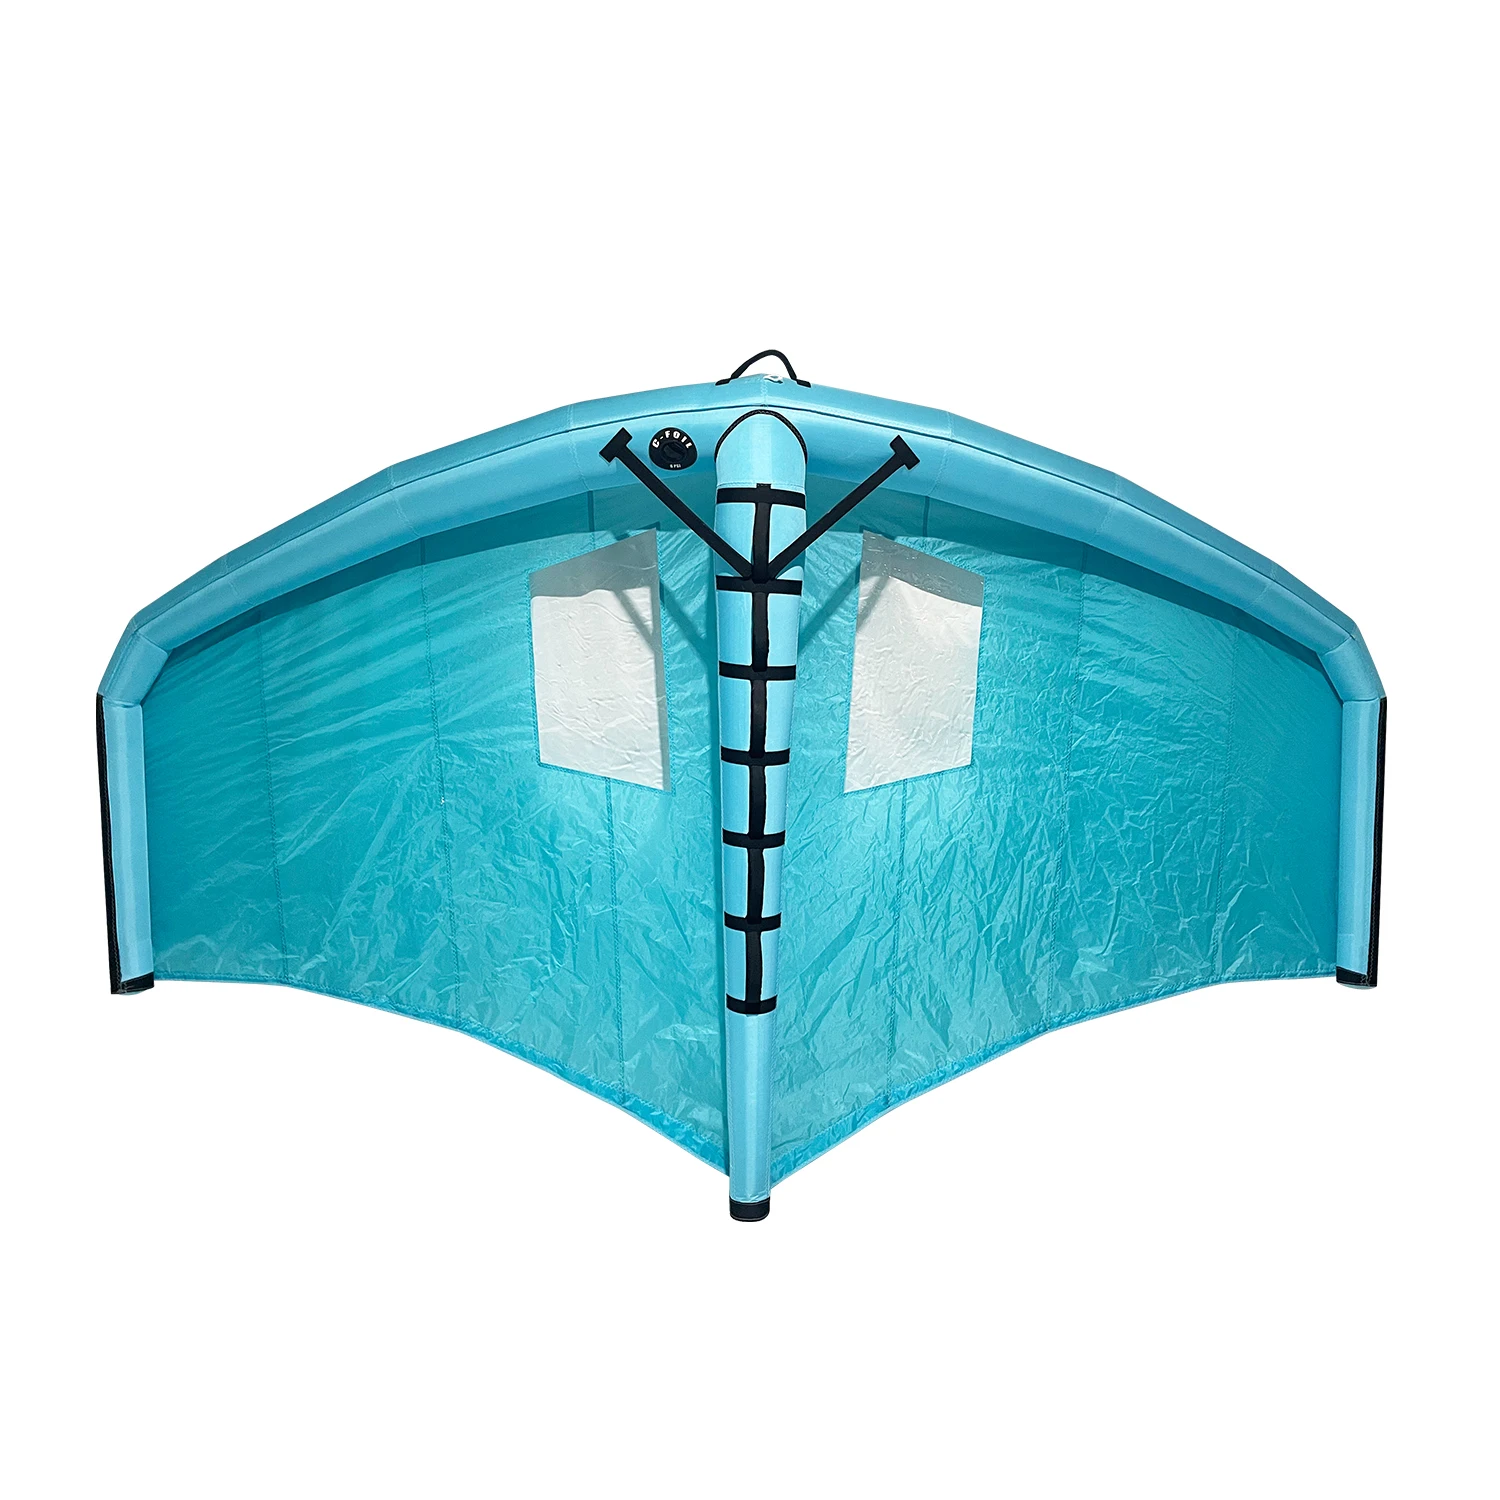 KW02 Handheld Inflatable 3M/4M/5M/6M Wingfoiling Sail Wing Foil Surfing Windsurf Wingsurf Wingboard for Kitesurfing SUP Surfing